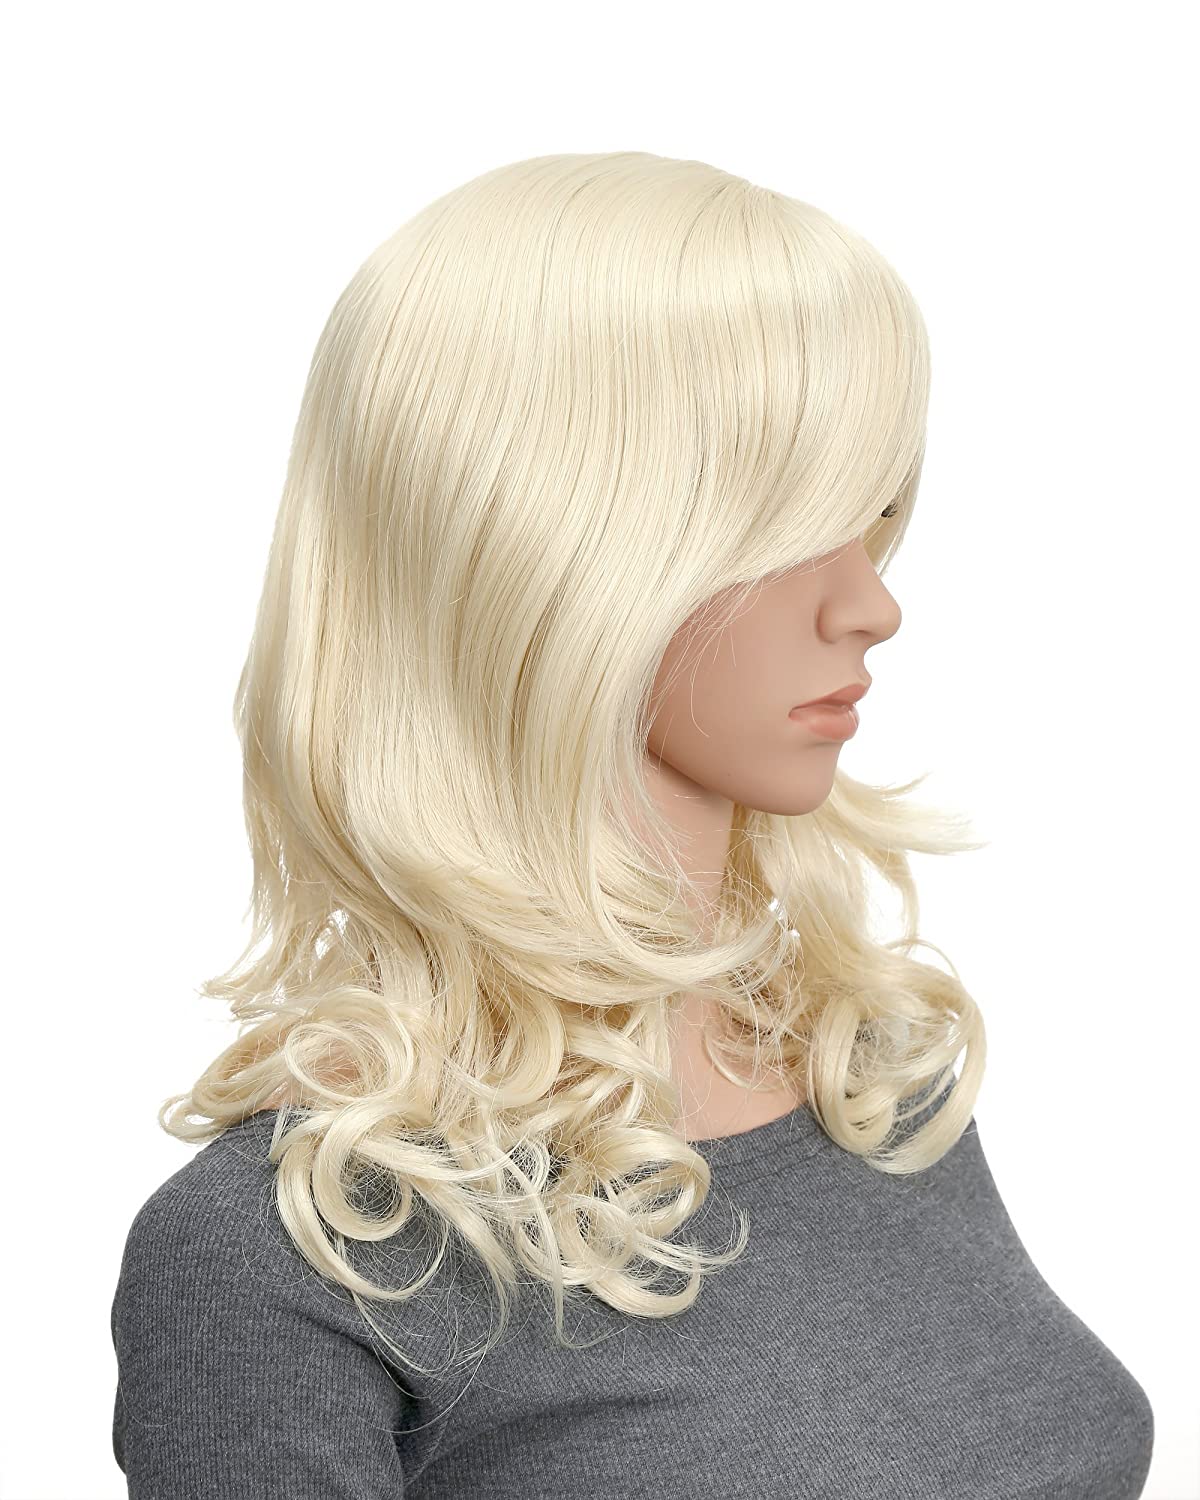 Onedor Full Head Beautiful Long Curly Wave Stunning Wig Charming Curly Costume Wigs with Fringe (pale blonde) - image 2 of 6